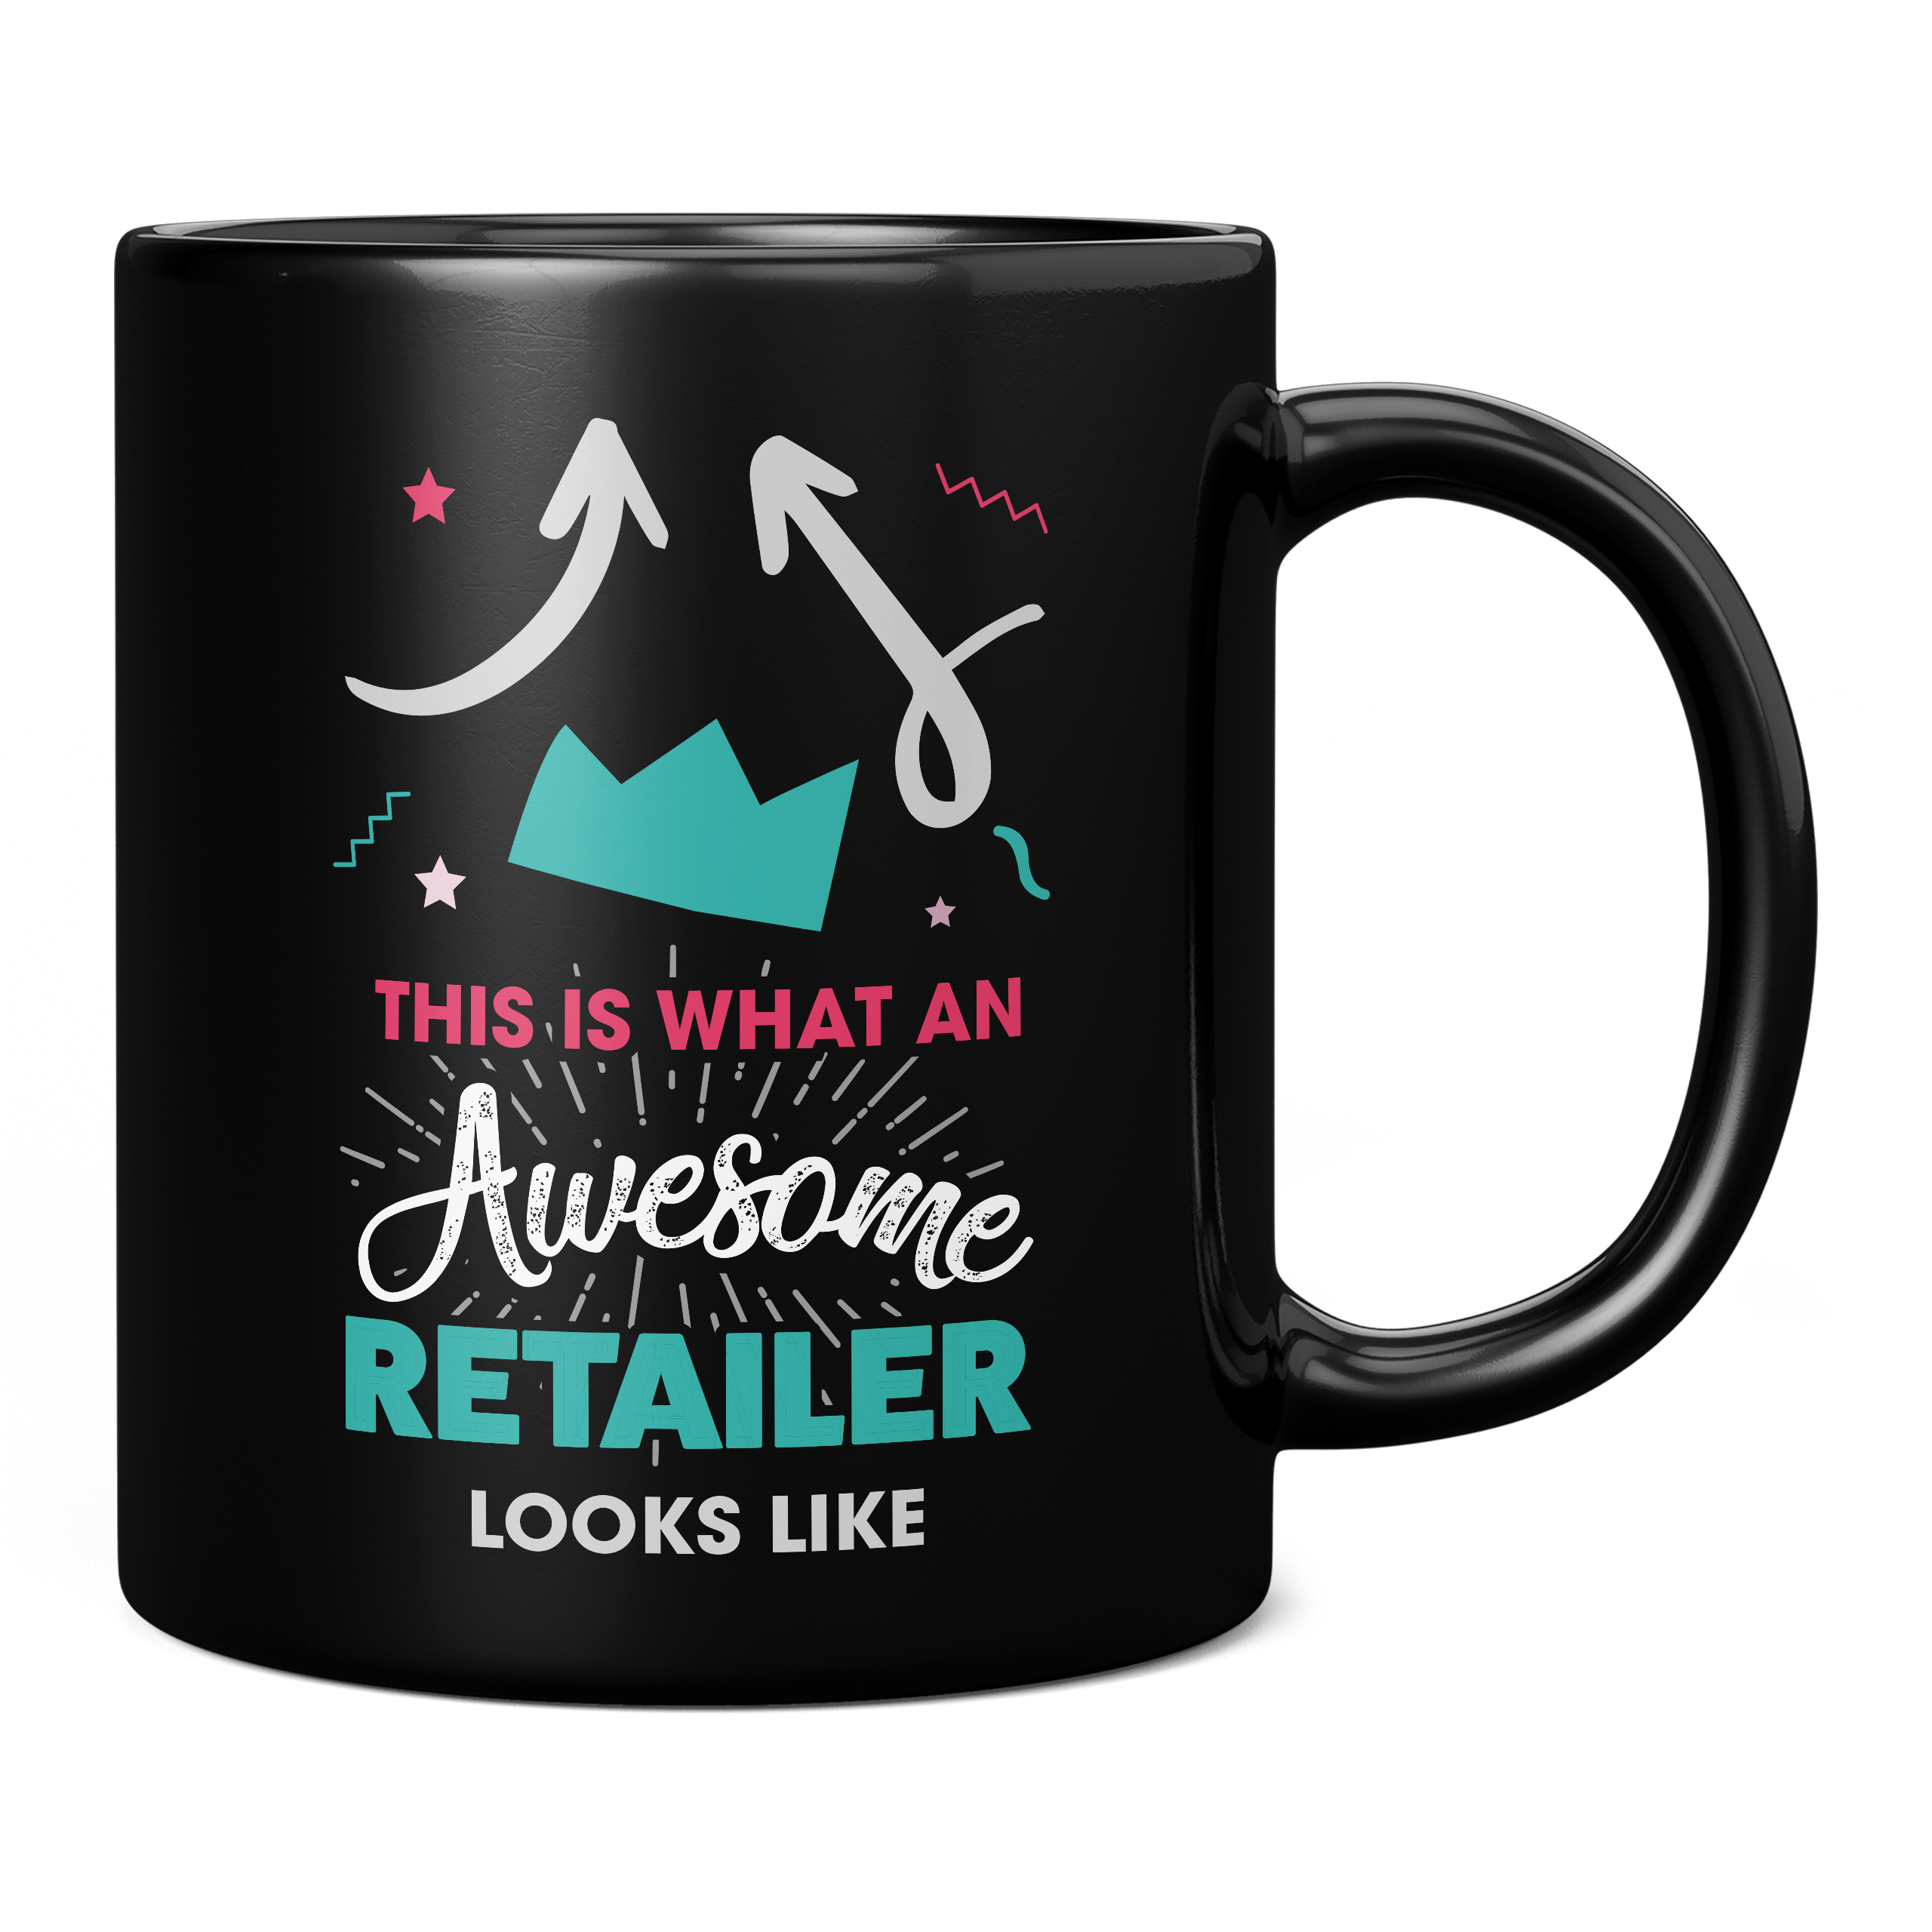 THIS IS WHAT AN AWESOME RETAILER LOOKS LIKE 11OZ NOVELTY MUG